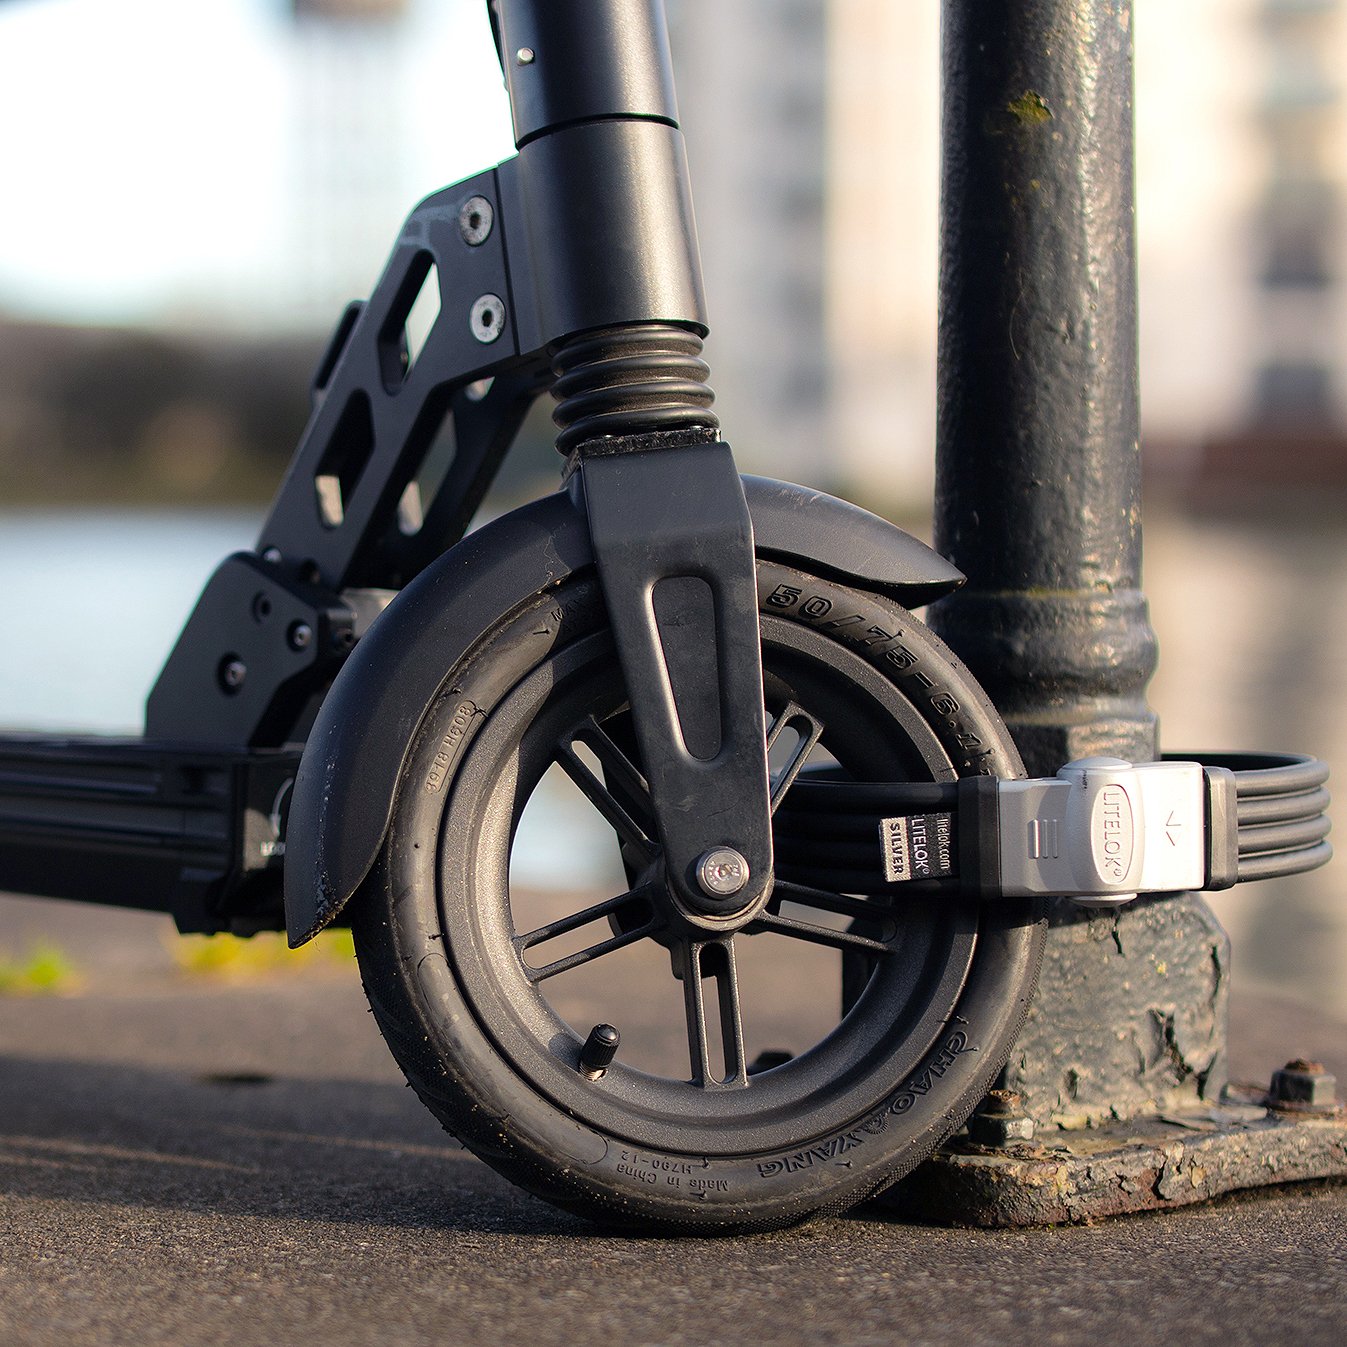 E-Scooter Locks - Electronic Scooter Locks – Tagged E-Scooter